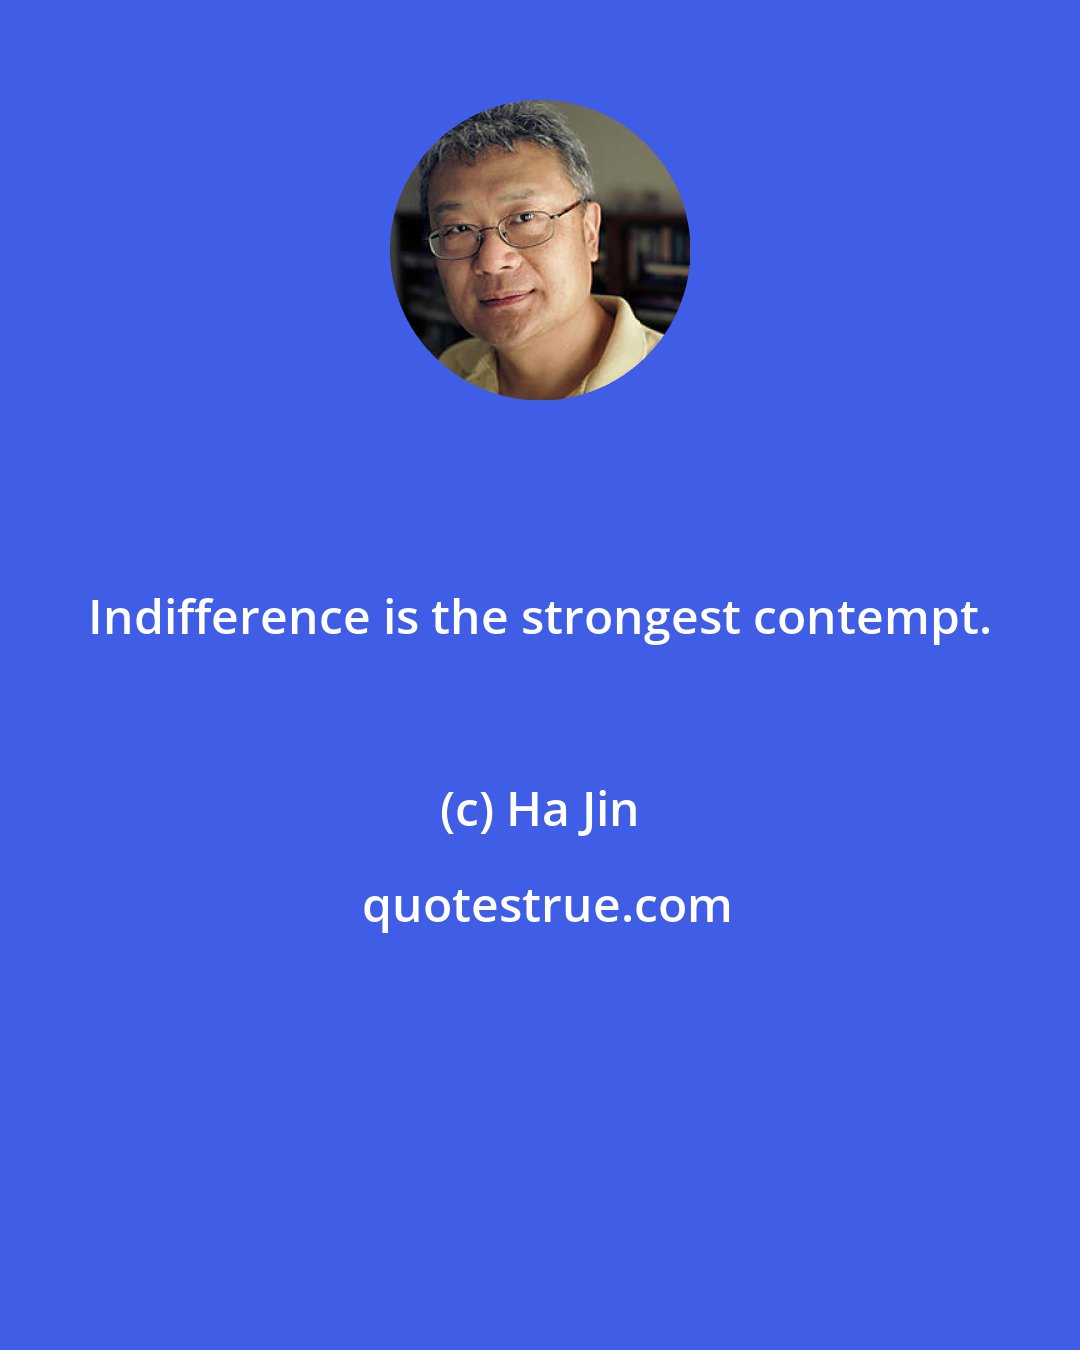 Ha Jin: Indifference is the strongest contempt.